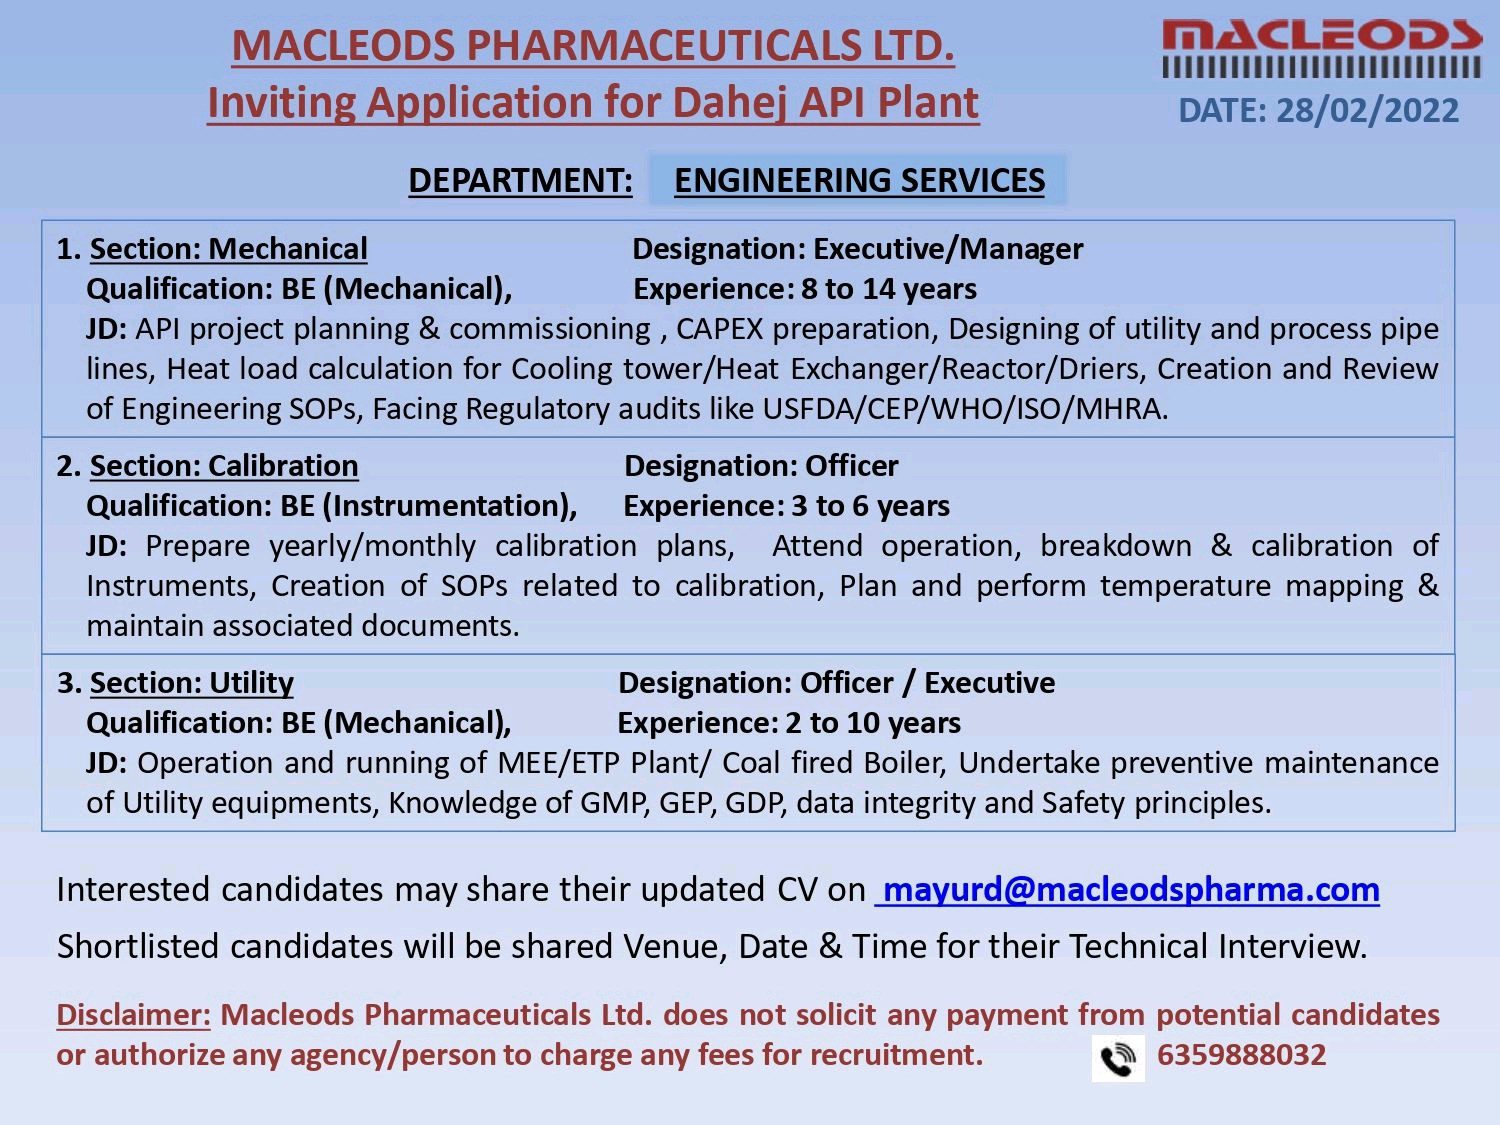 macleods inviting application pharmaceutical engineering services department at dahej api plant